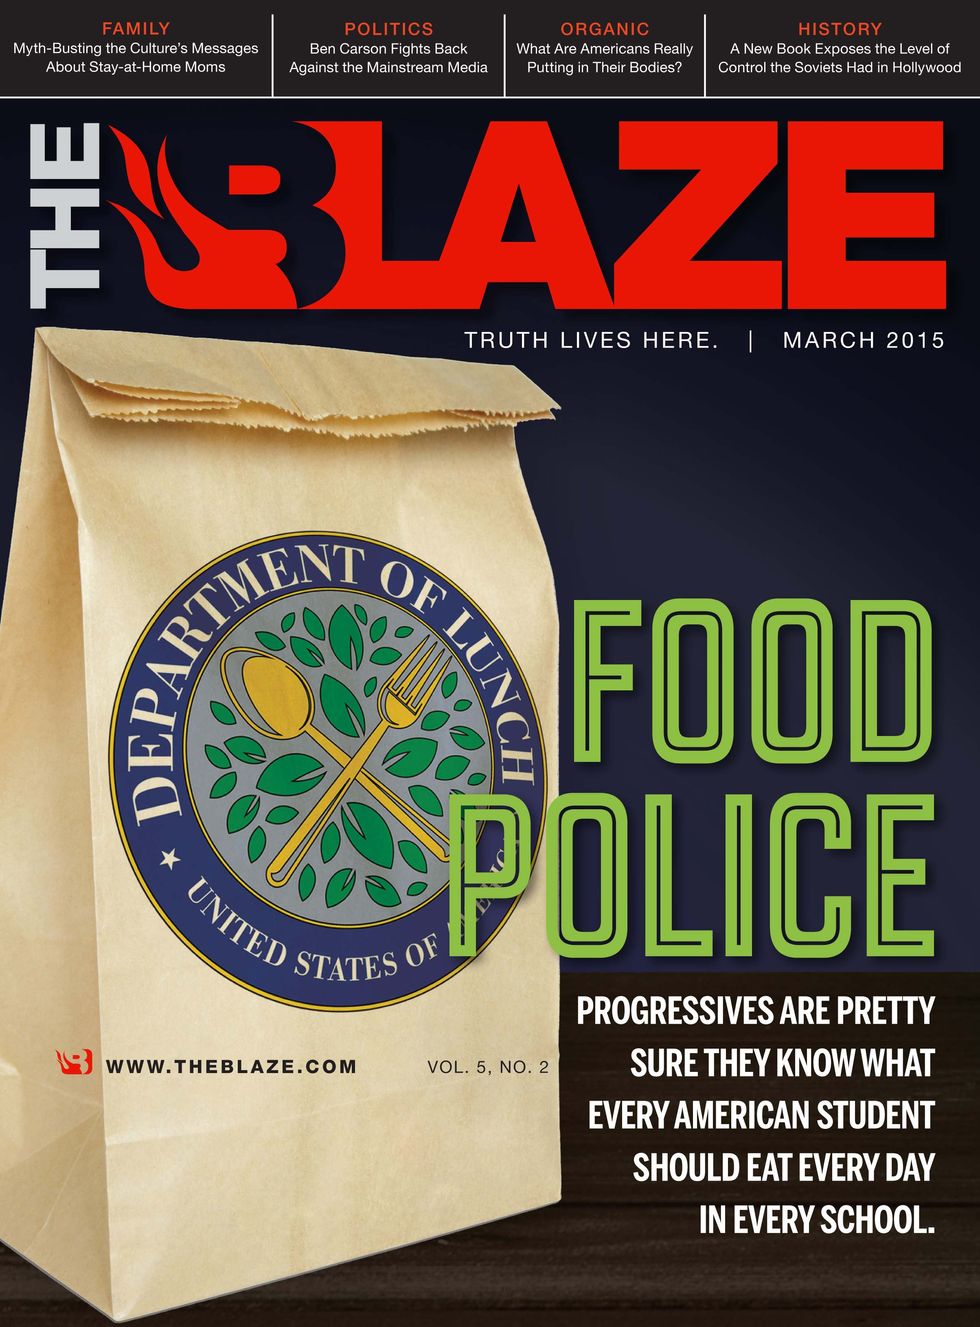 New Blaze Mag cover: Food Police